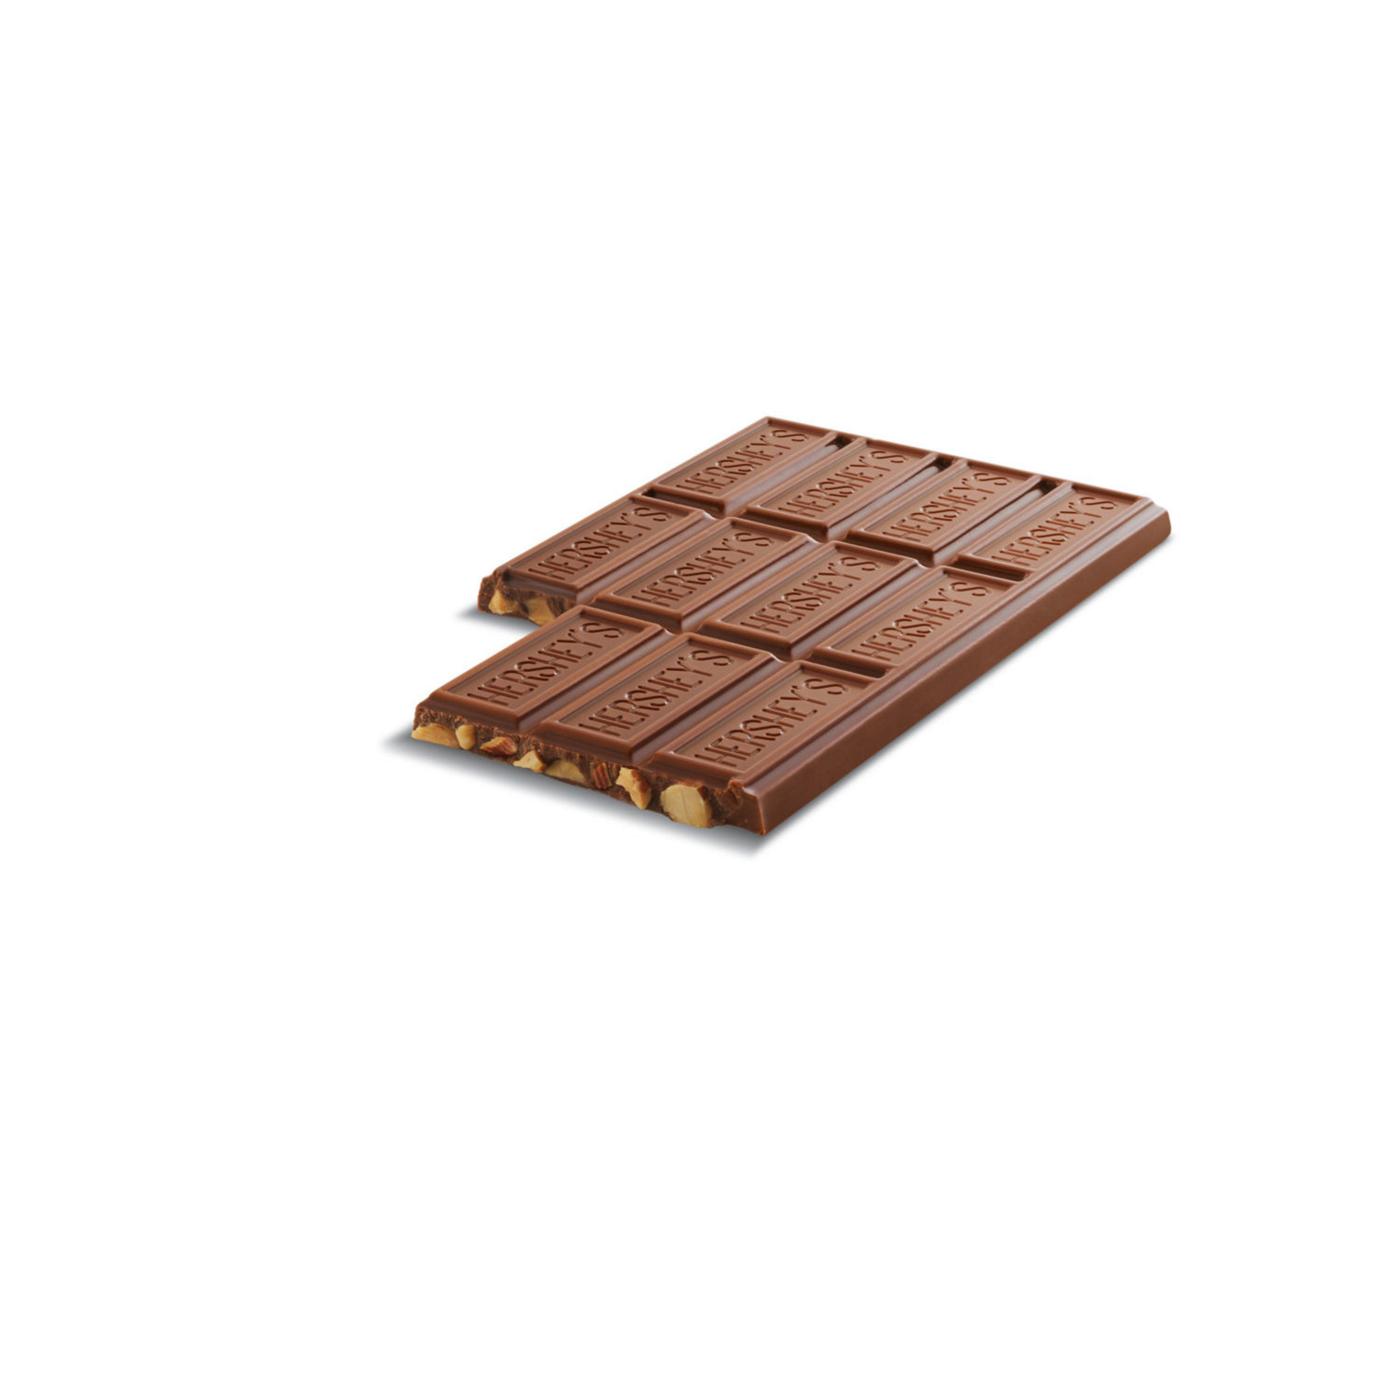 Hershey's Milk Chocolate with Almonds XL Candy Bar; image 6 of 7